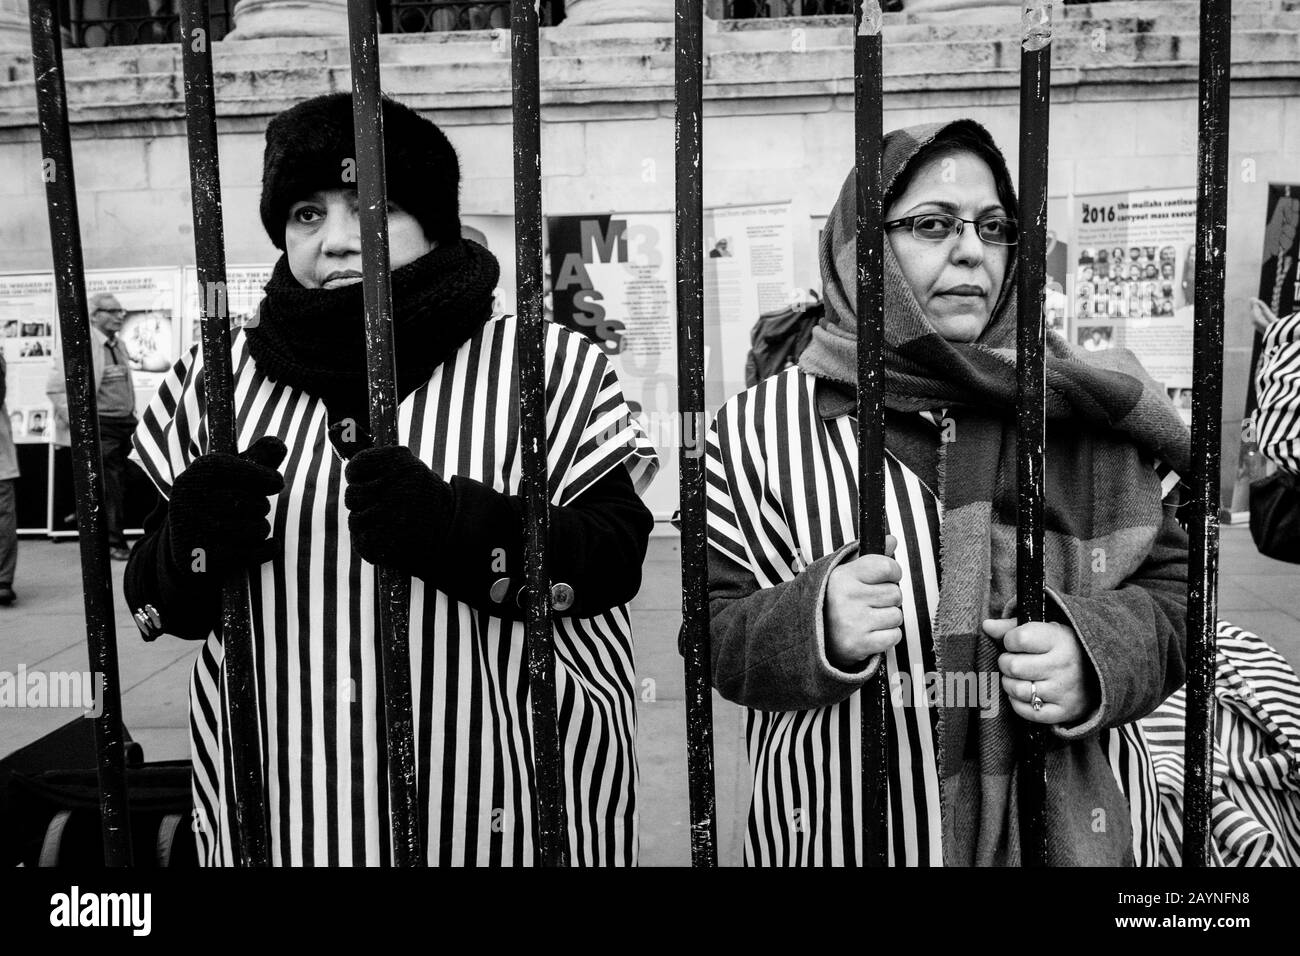 London black and white street photography: Iranian demonstrators protest against detention and murder of political prisoners by authorities in Iran. Stock Photo